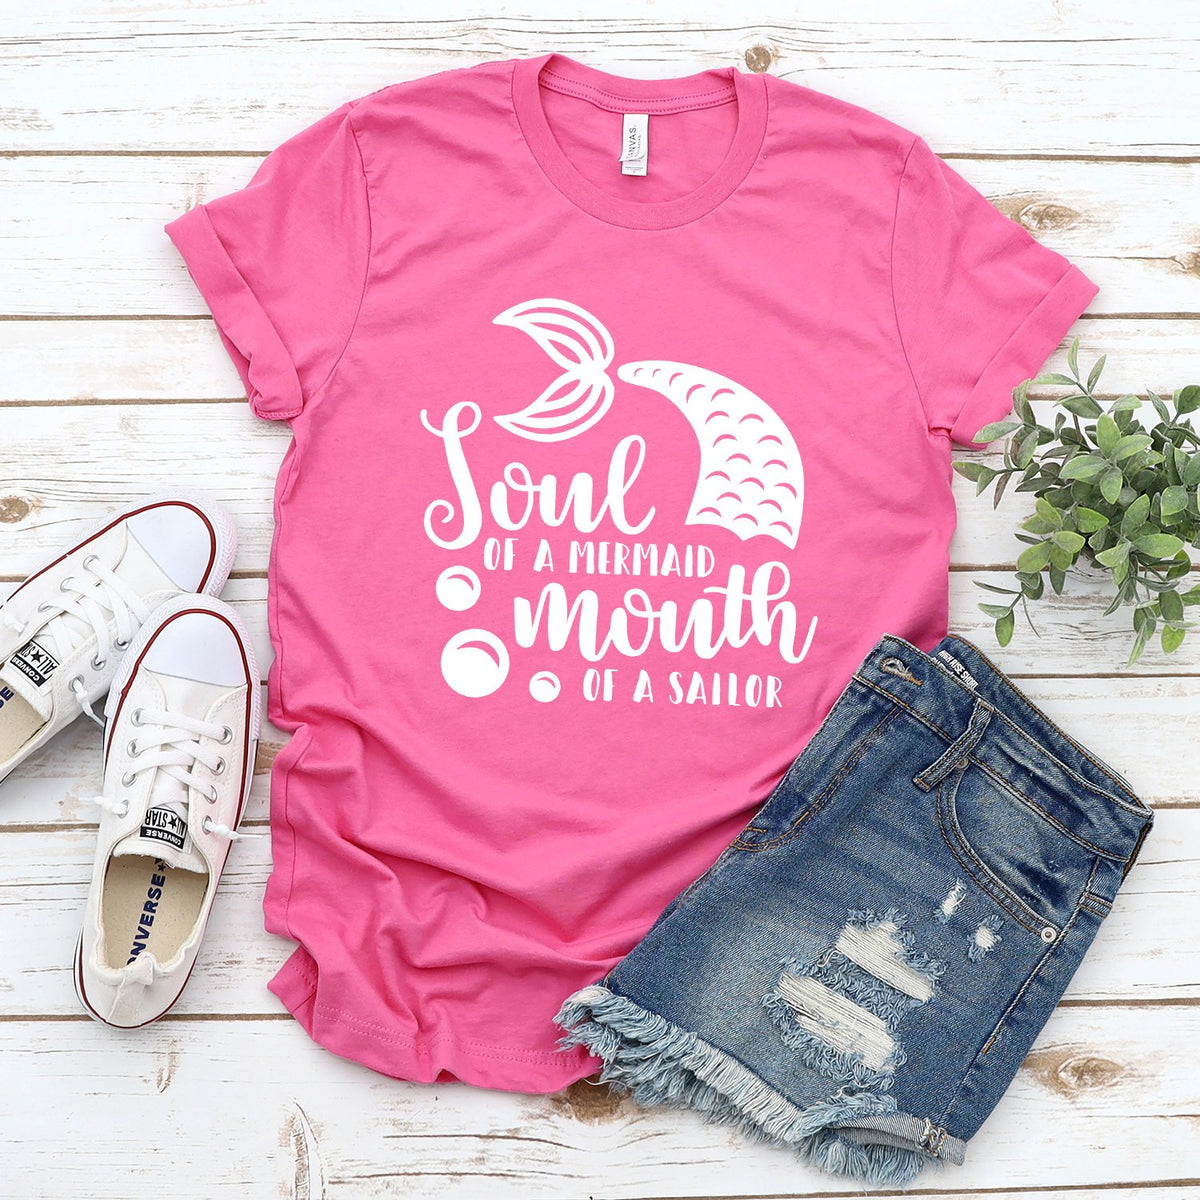 Soul of A Mermaid Mouth of A Sailor - Short Sleeve Tee Shirt